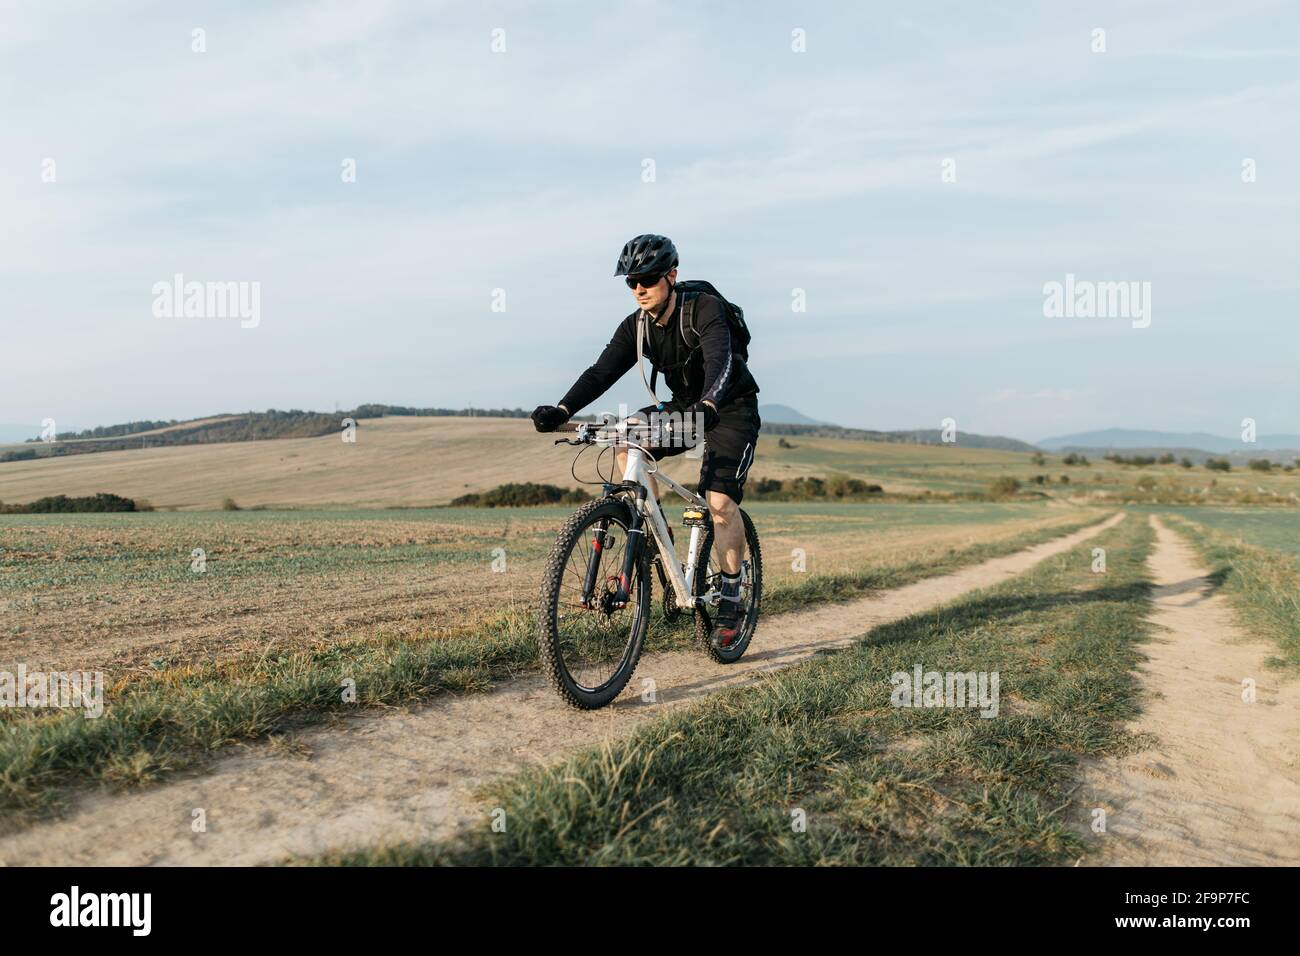 Male cyclist riding bike along country road on clear sunny day. Man mountain biking on dirt track. Stock Photo